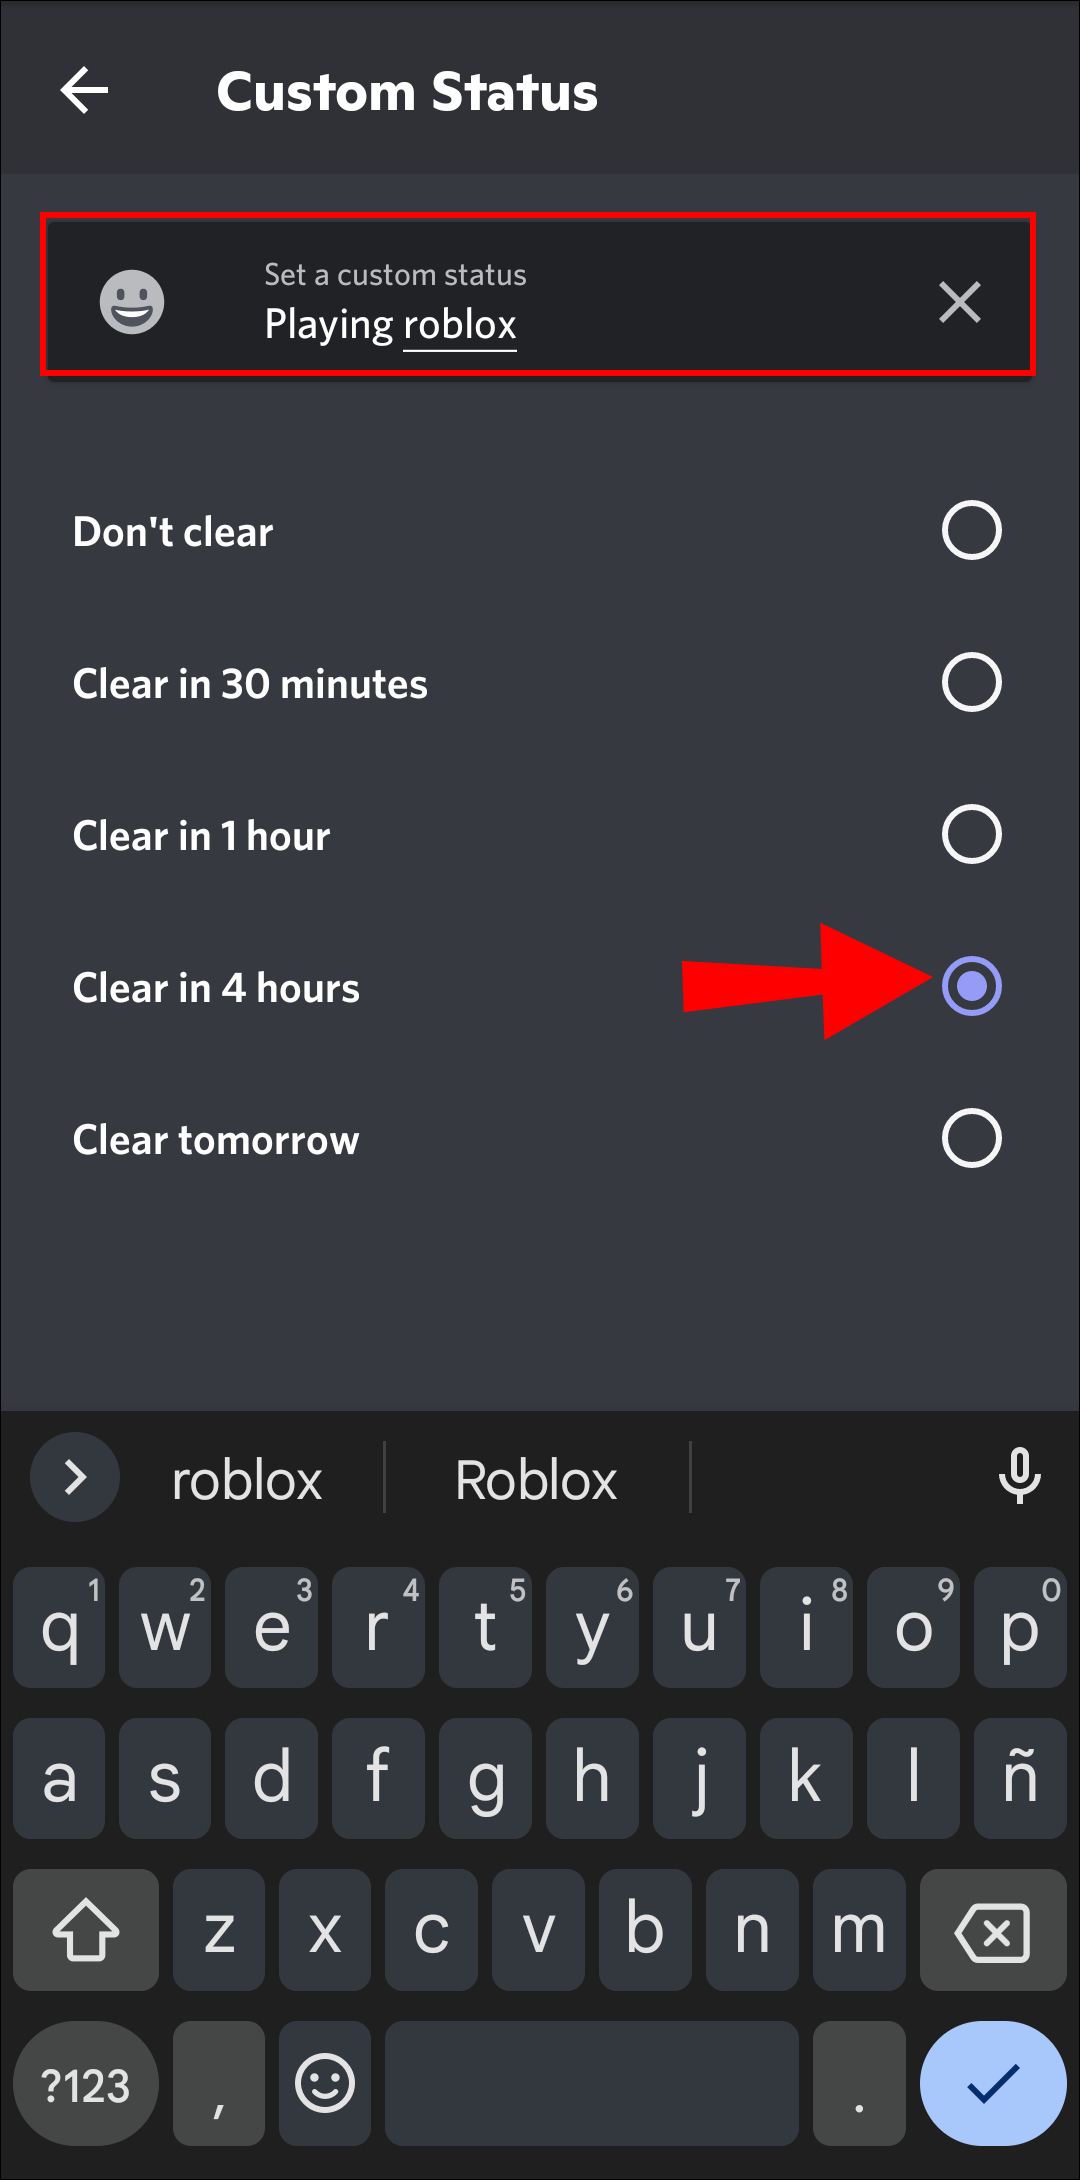 How to play Roblox in your Browser 